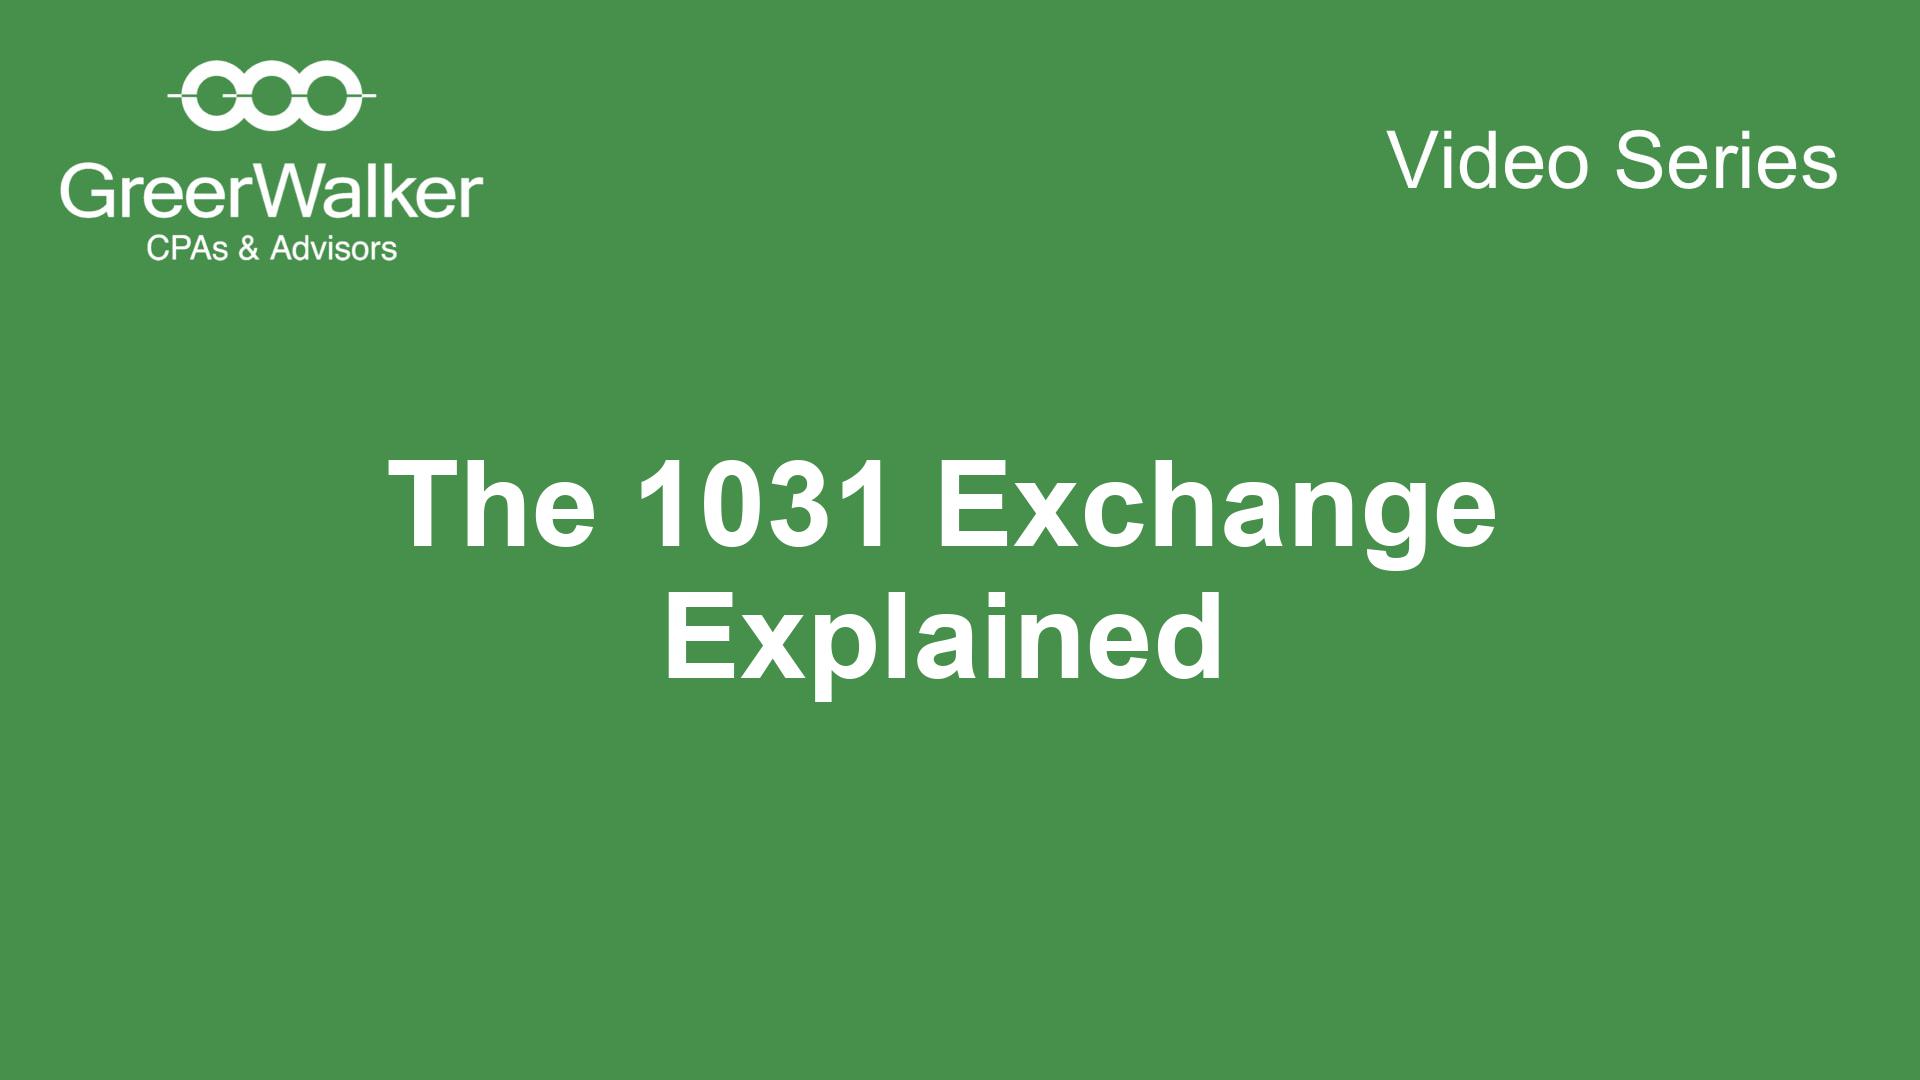 The 1031 Exchange Explained